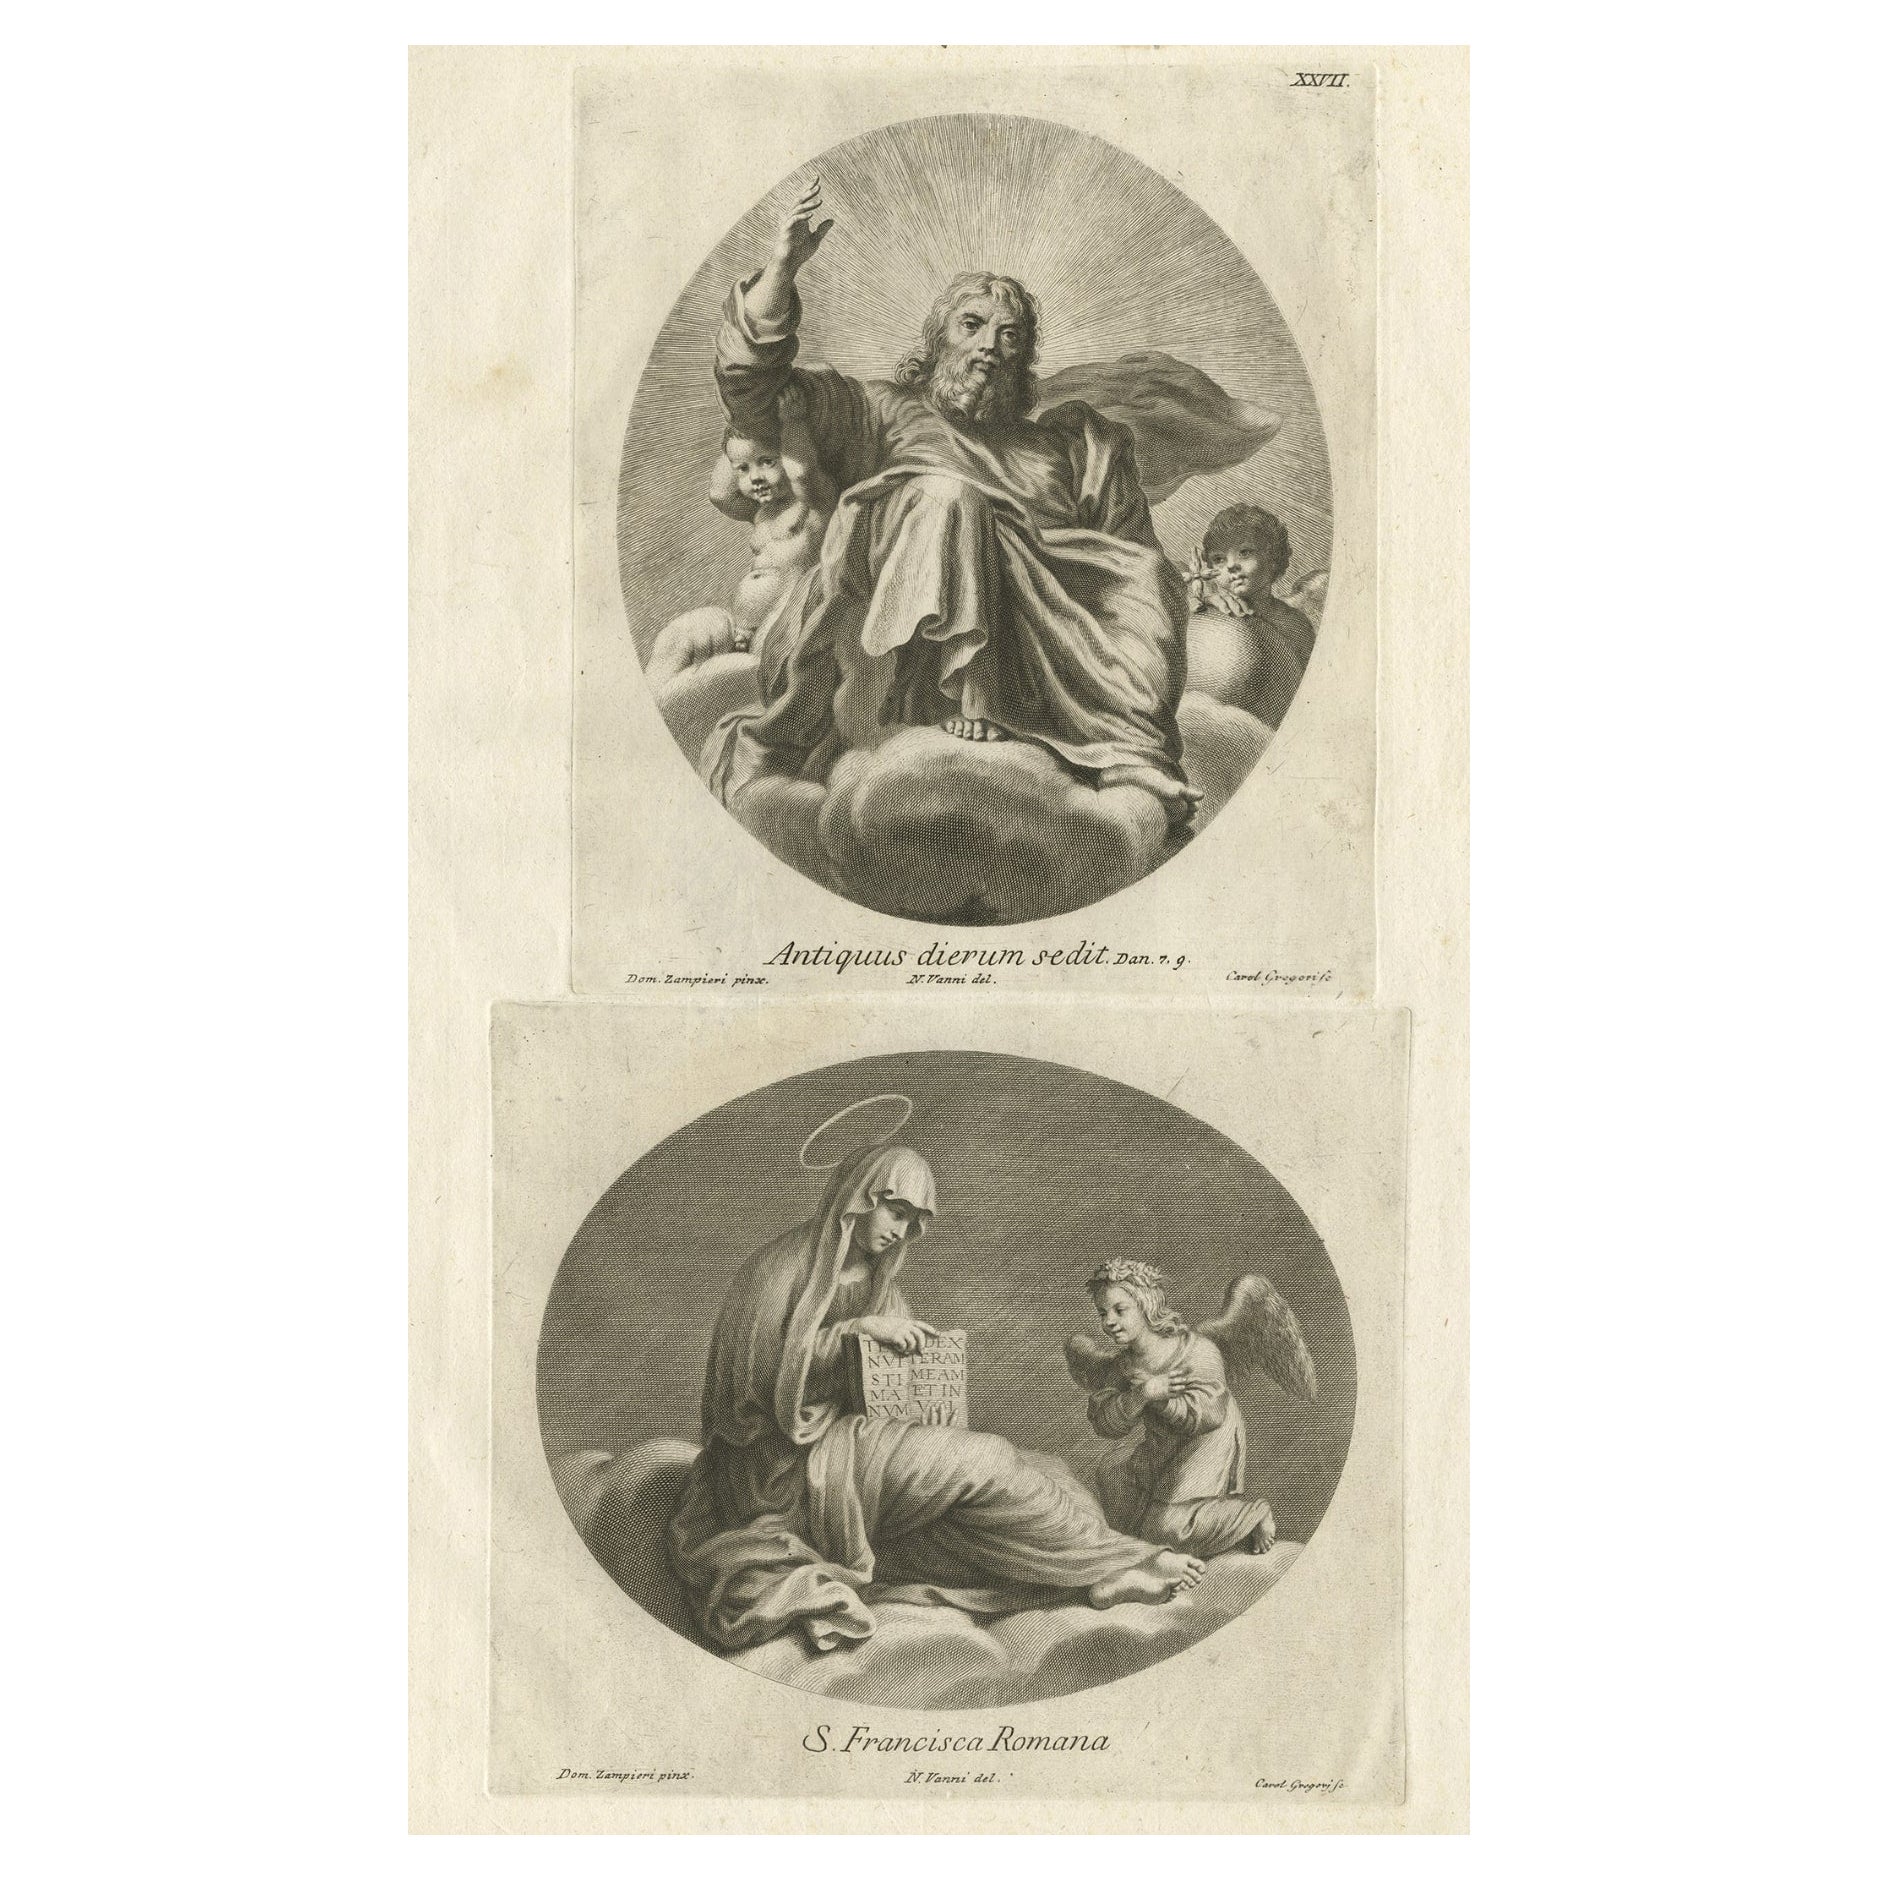 Scarce Engravings of the Ancient of Days of God from the Bible Book of Daniel